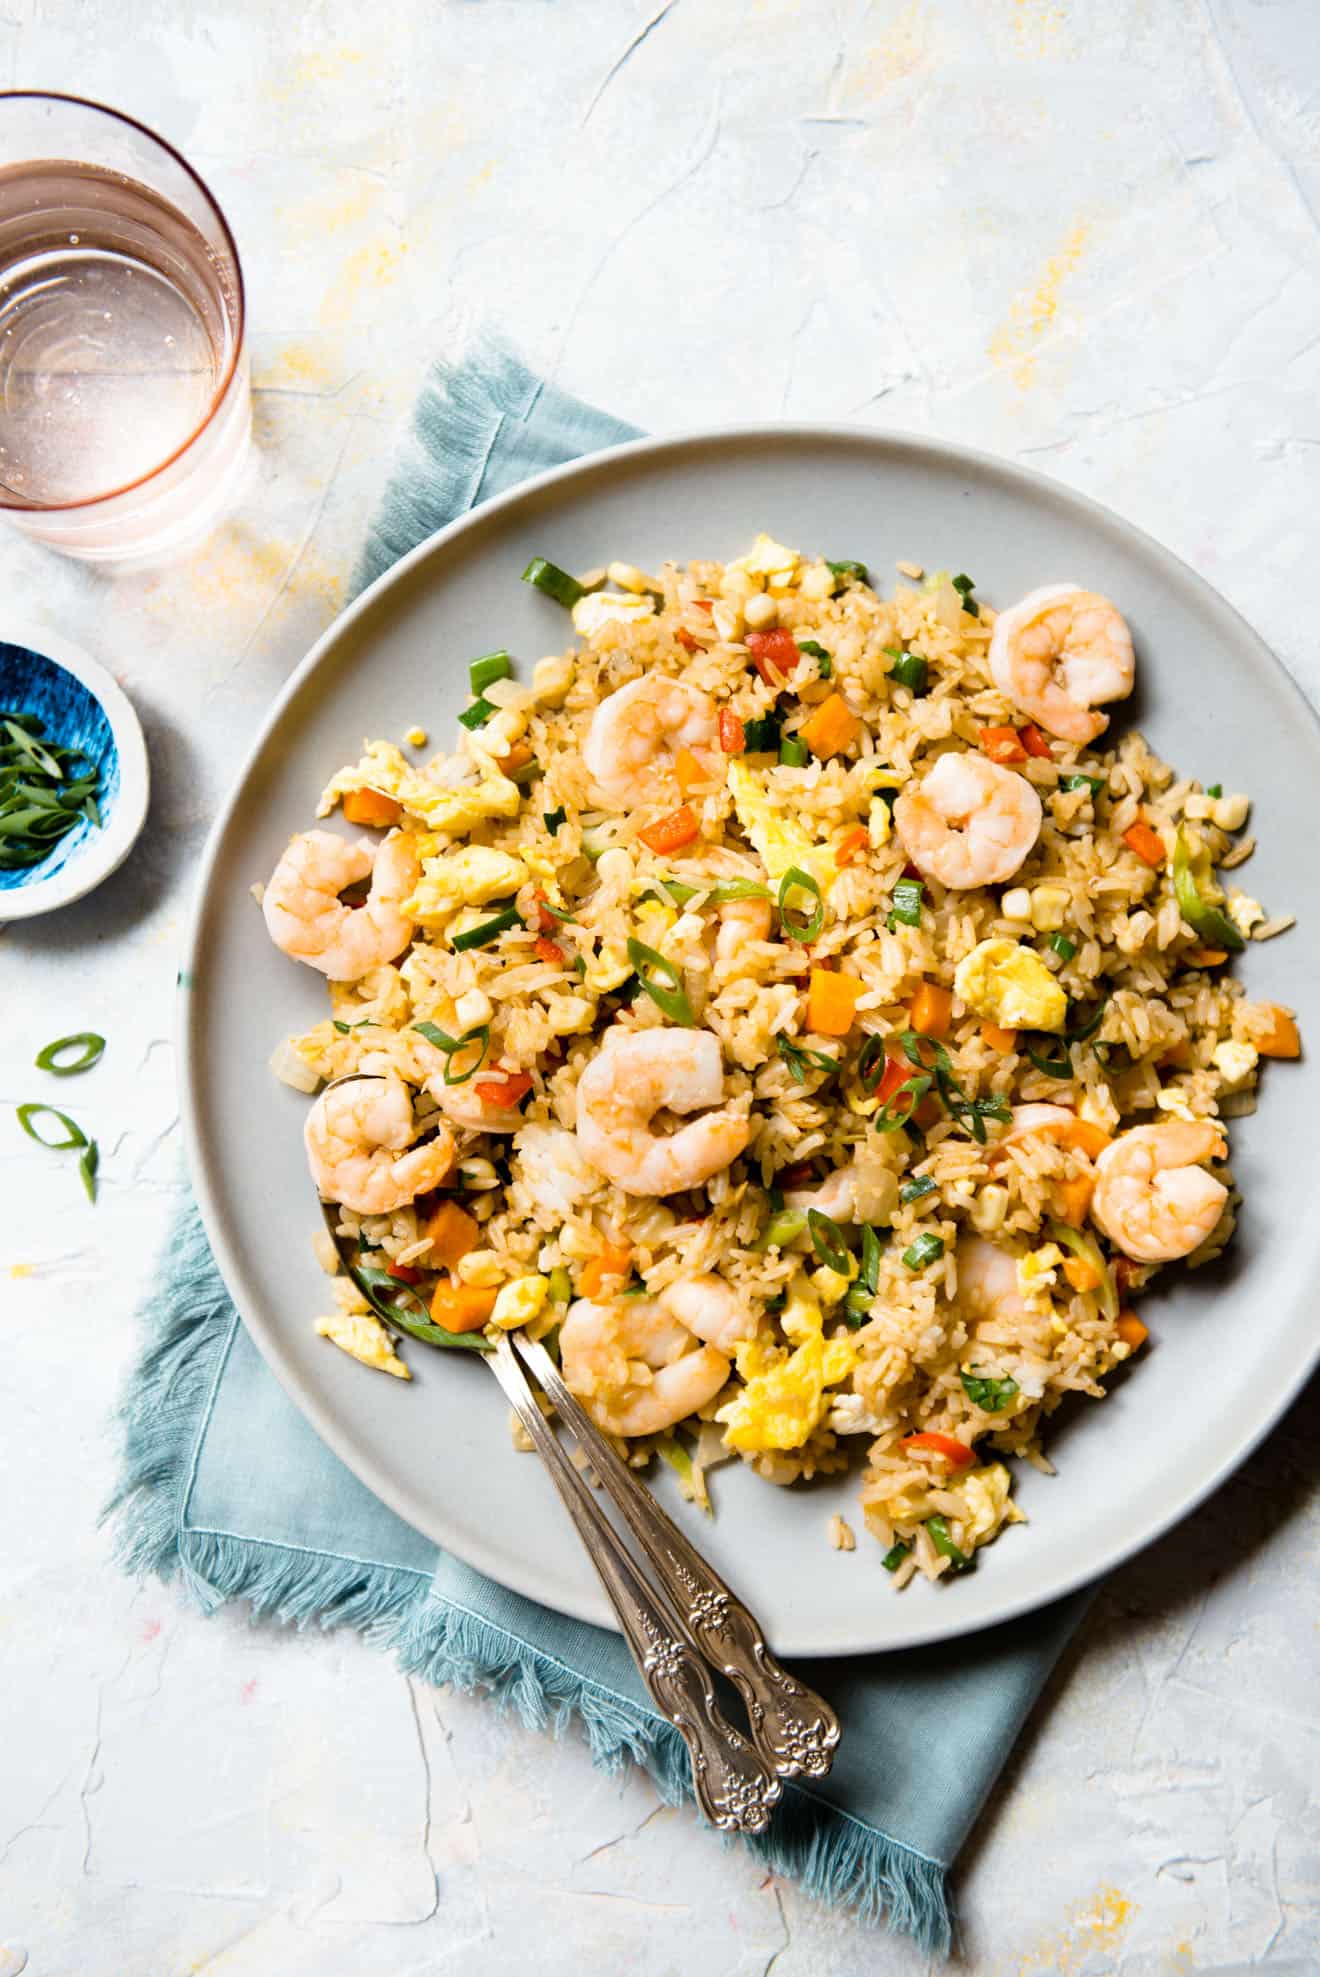 How to Make Shrimp Fried Rice - easy, healthy meal in less than 30 minutes!